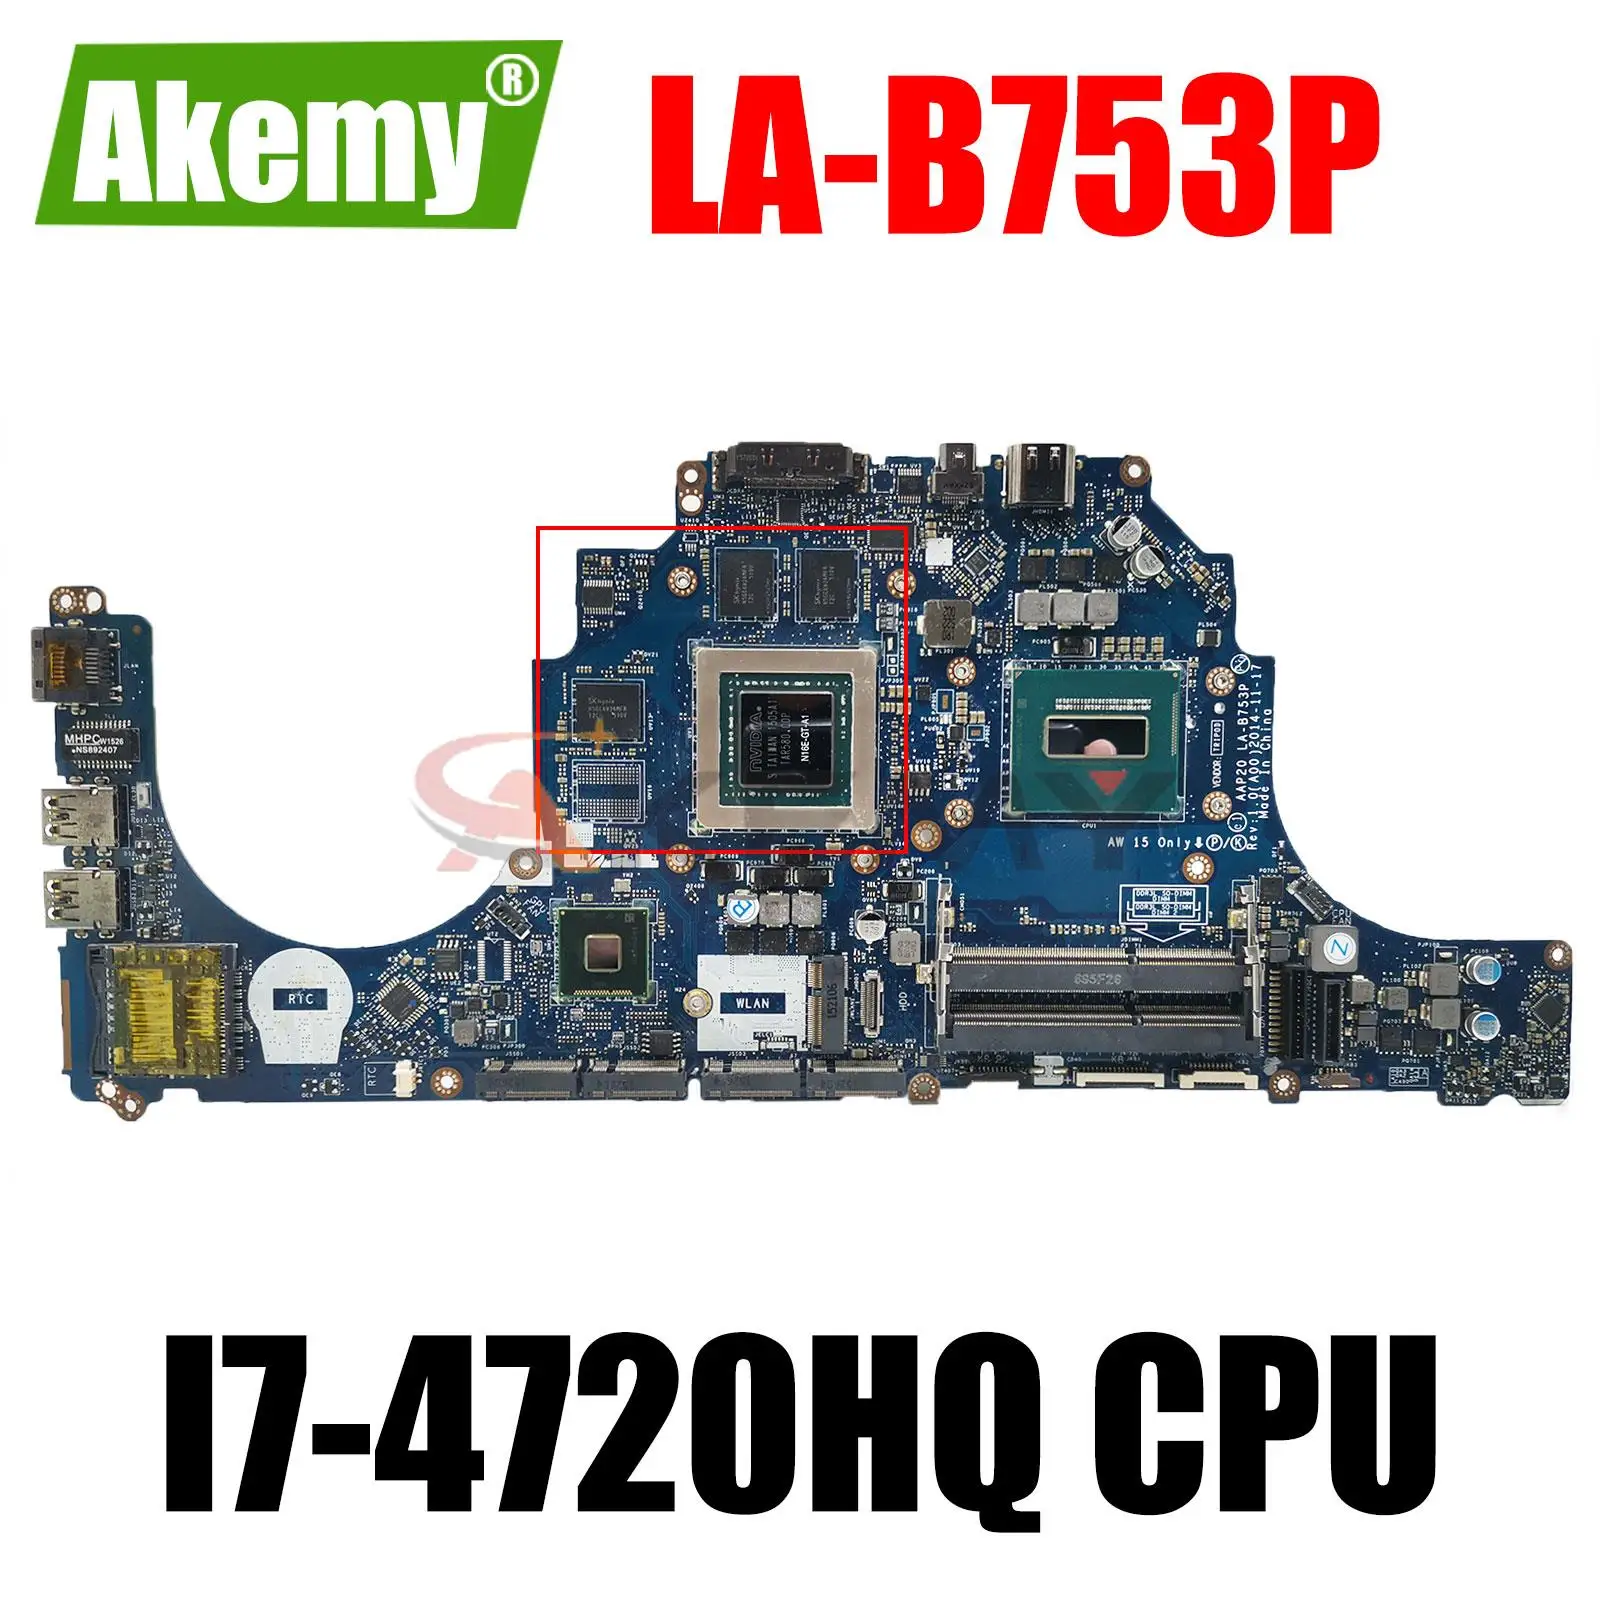 

For Dell Alienware 15 R1 17 R2 Laptop Motherboard AAP20 LA-B753P With I7-4720HQ CPU GTX970M 3GB GPU DDR3